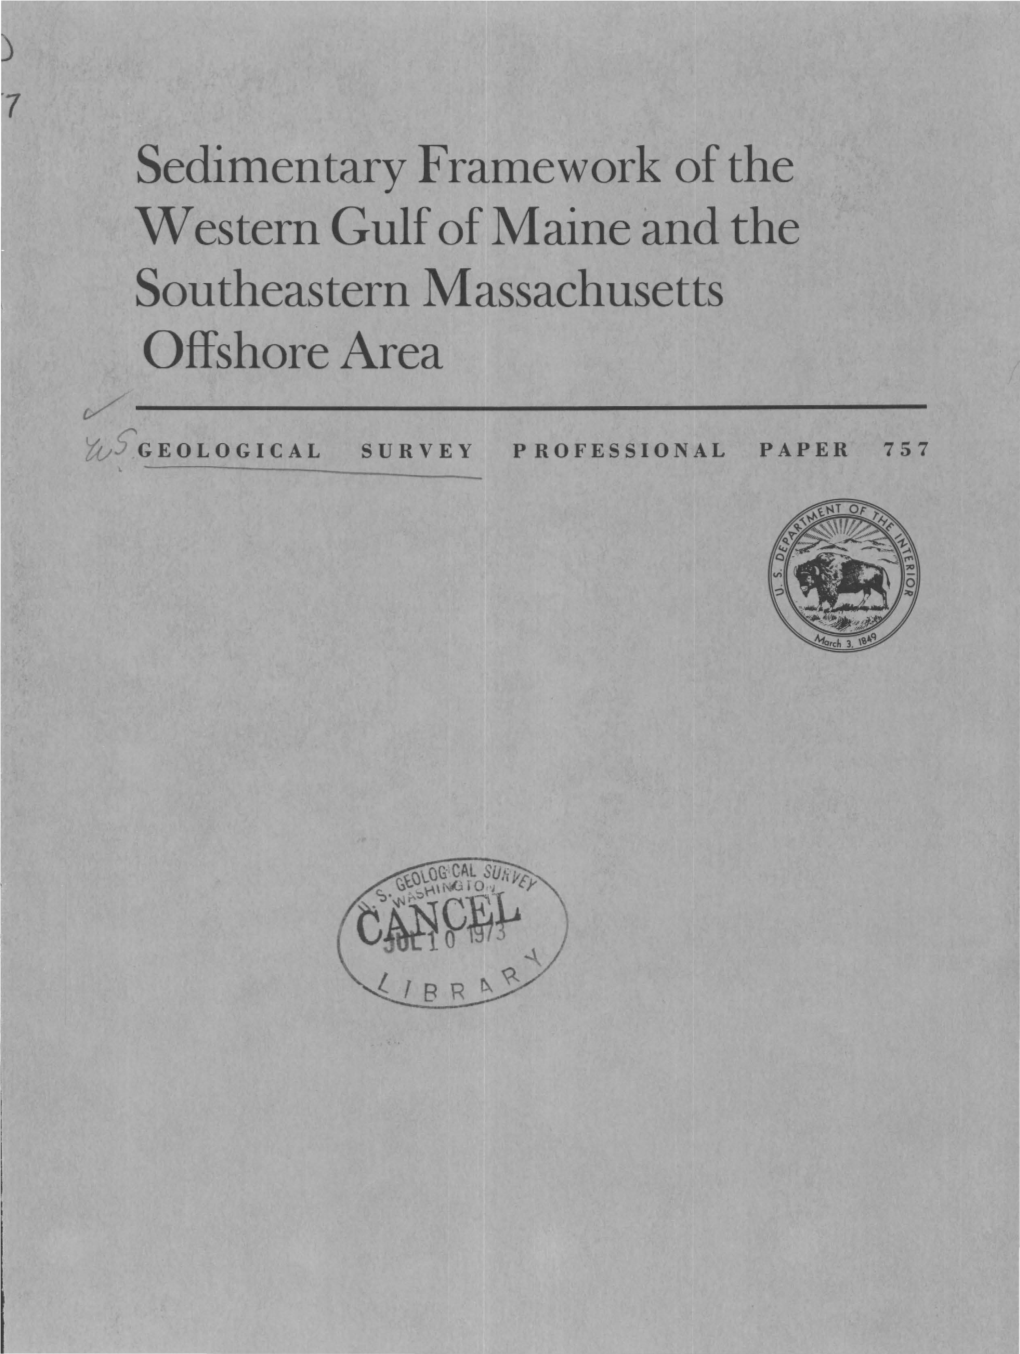 Sedimentary Framework of the Western Gulf of Maine and the Southeastern Massachusetts Offshore Area